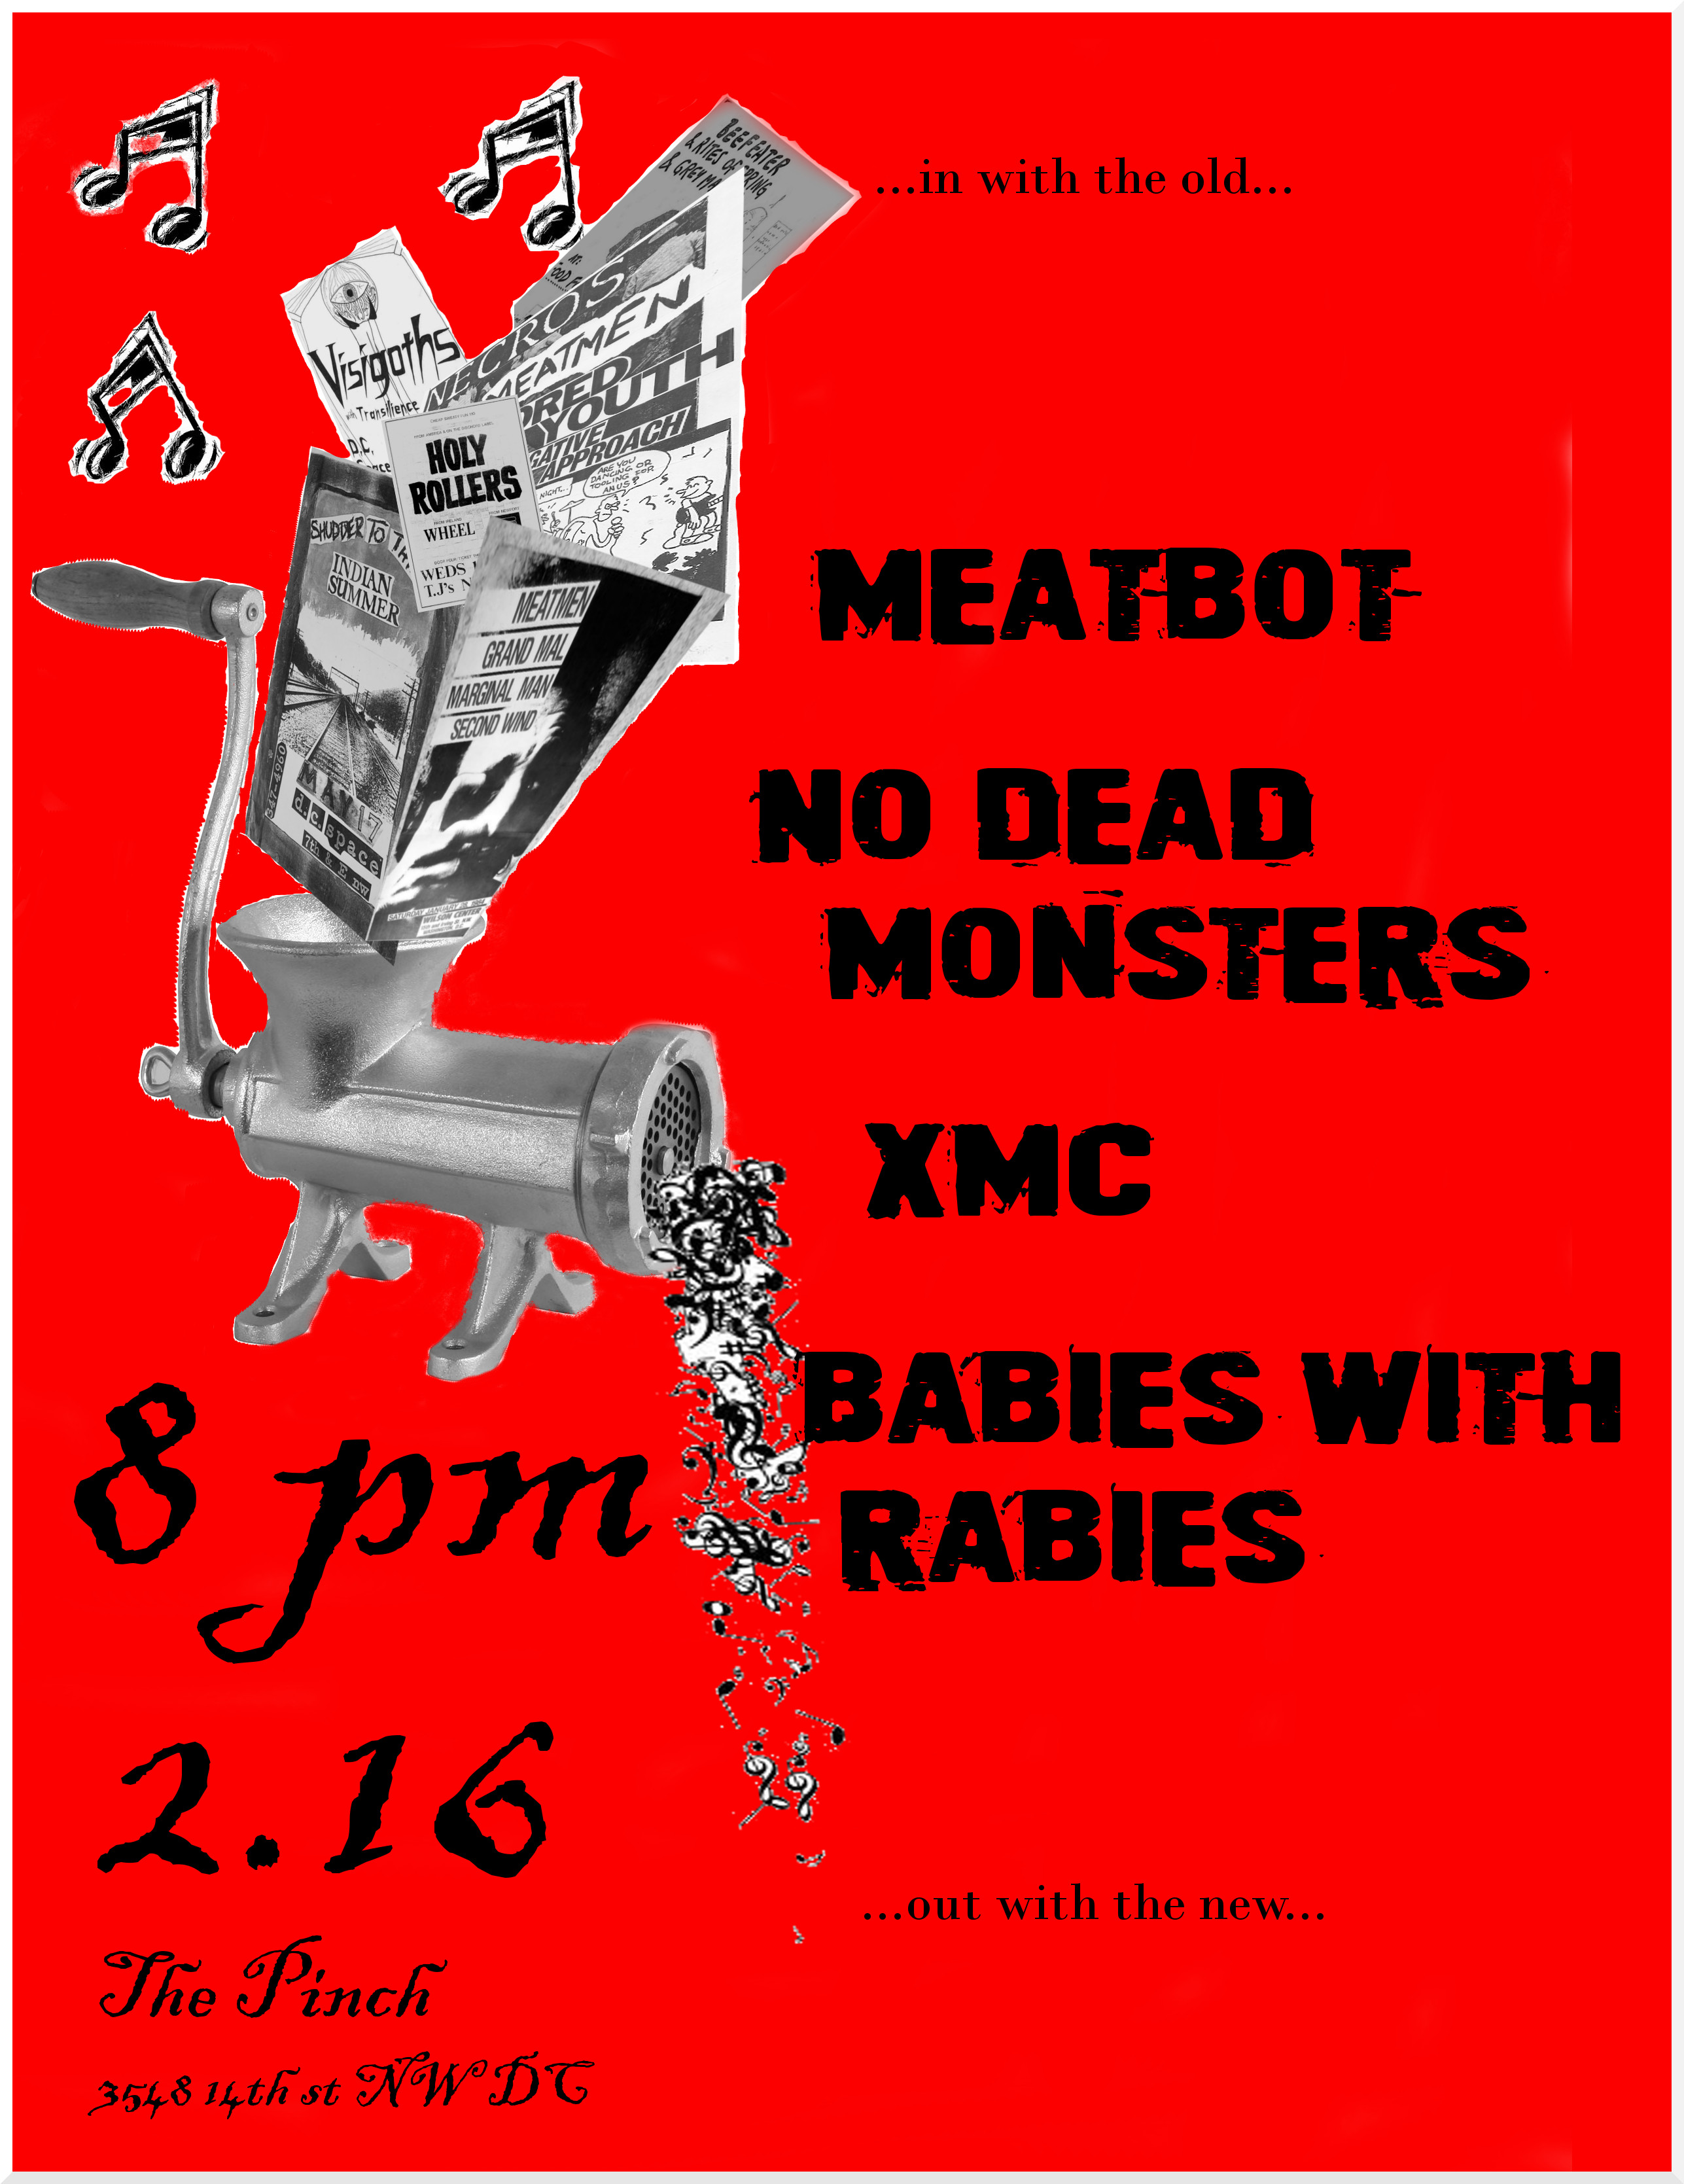 No Dead Monsters flyer The Pinch 2.16